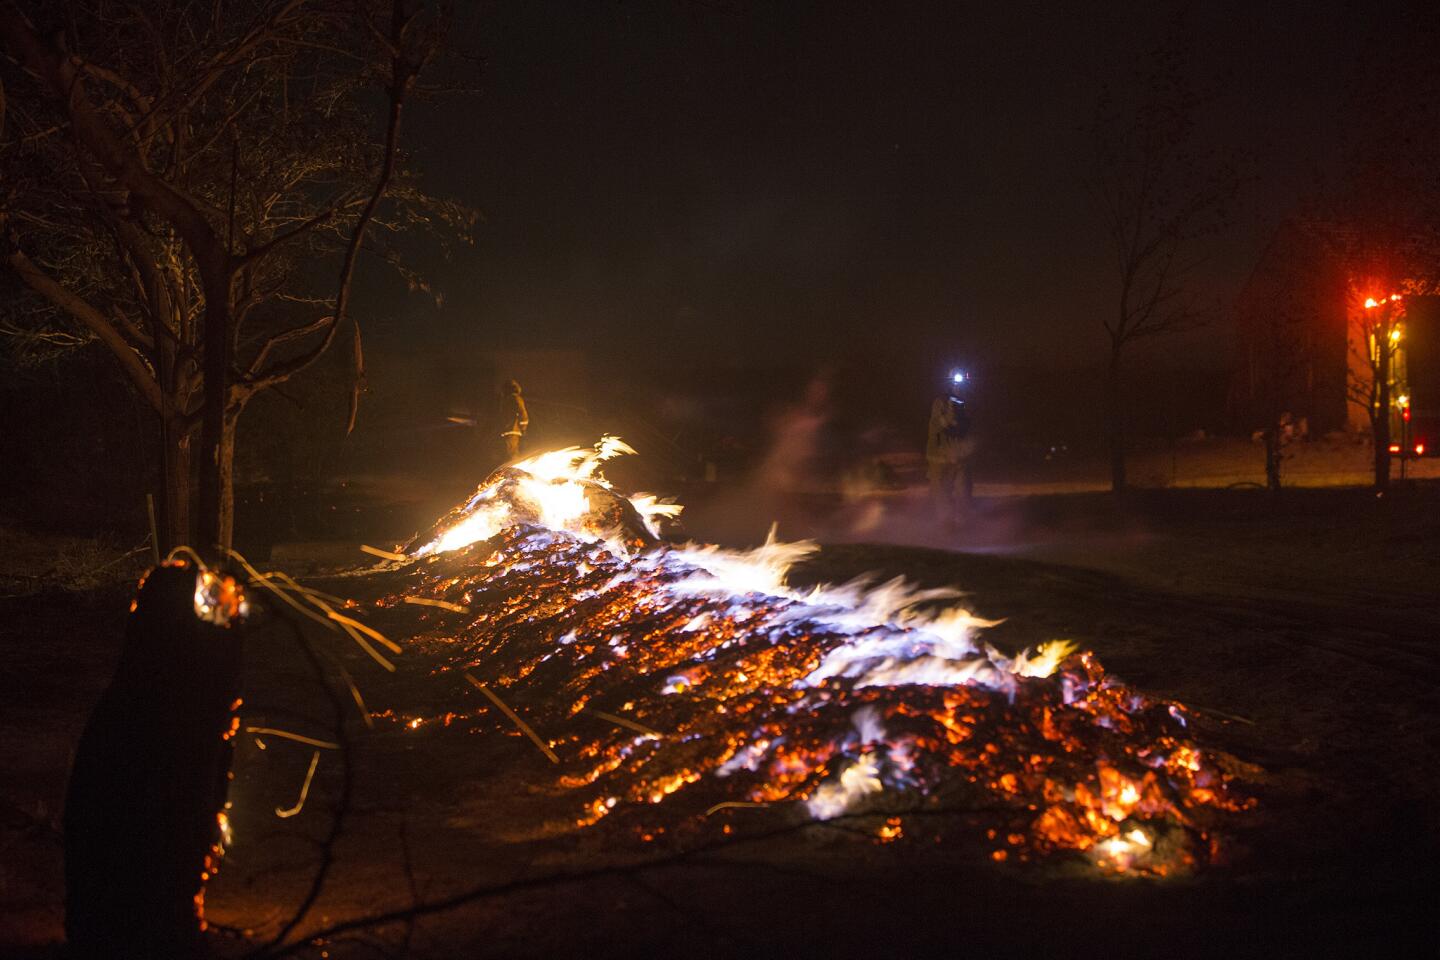 Firefighters use small headlamps at night to battle flames from the 3,500-acre brush fire after it ripped through the Cajon Pass and headed north July 17, 2015, in Baldy Mesa, Calif.